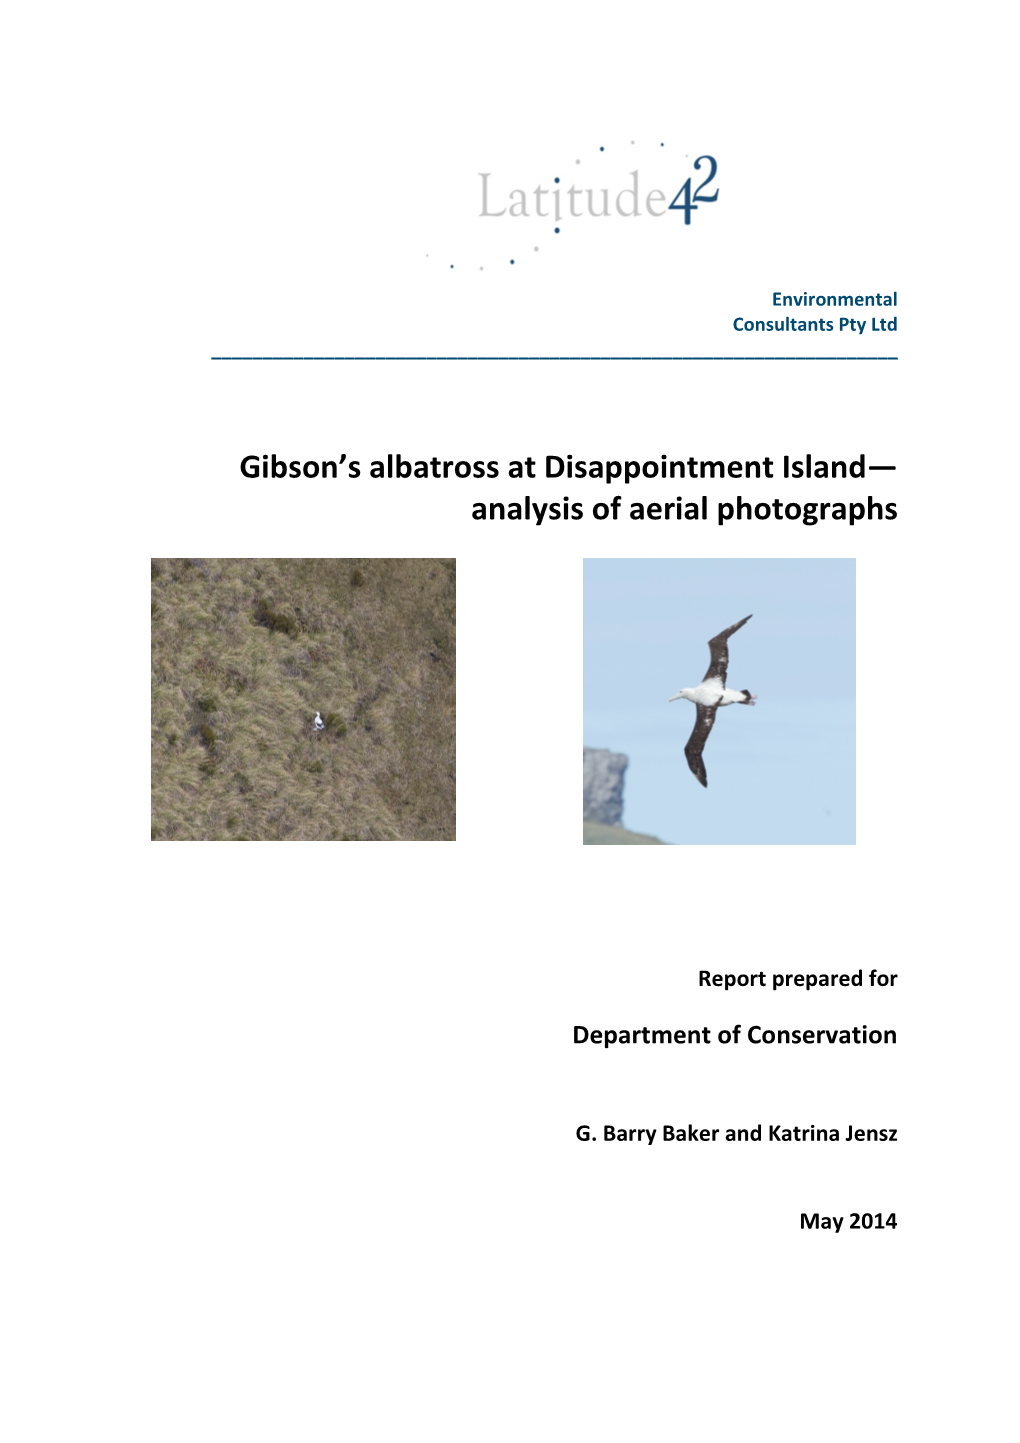 Gibson's Albatross at Disappointment Island